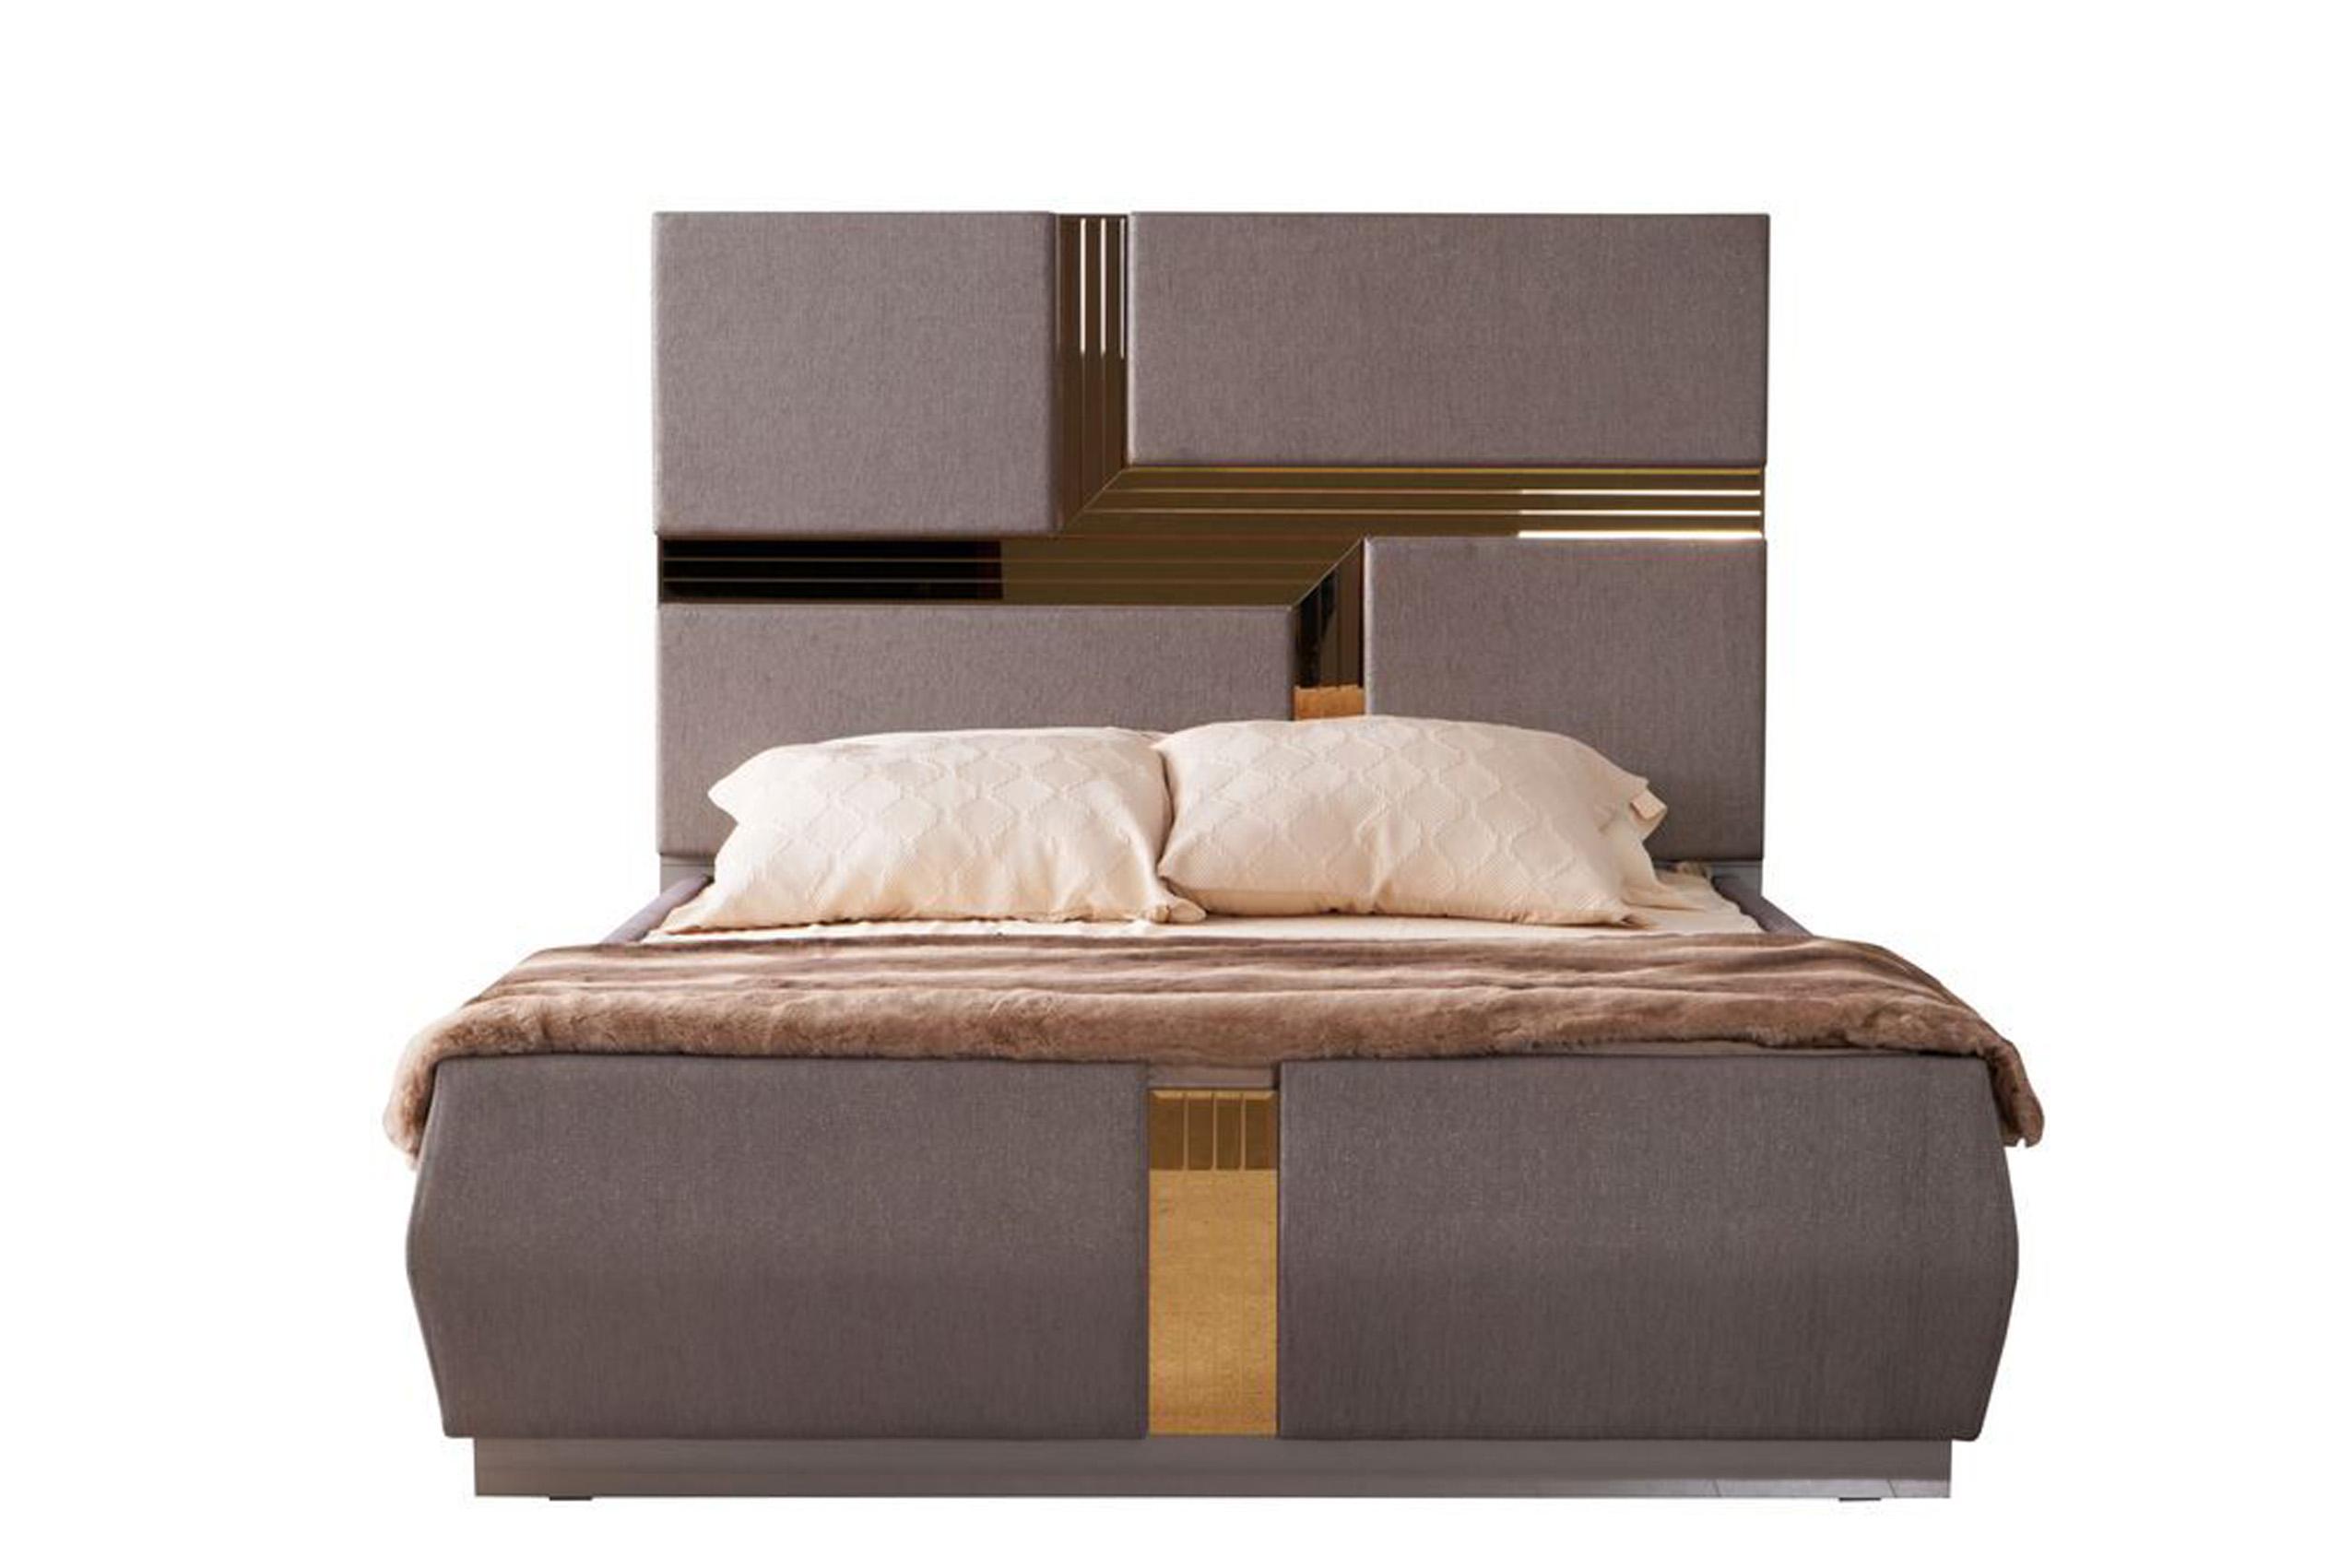 

    
Luxury Beige & Gold Fabric Queen Bed LORENZO Galaxy Home Contemporary
